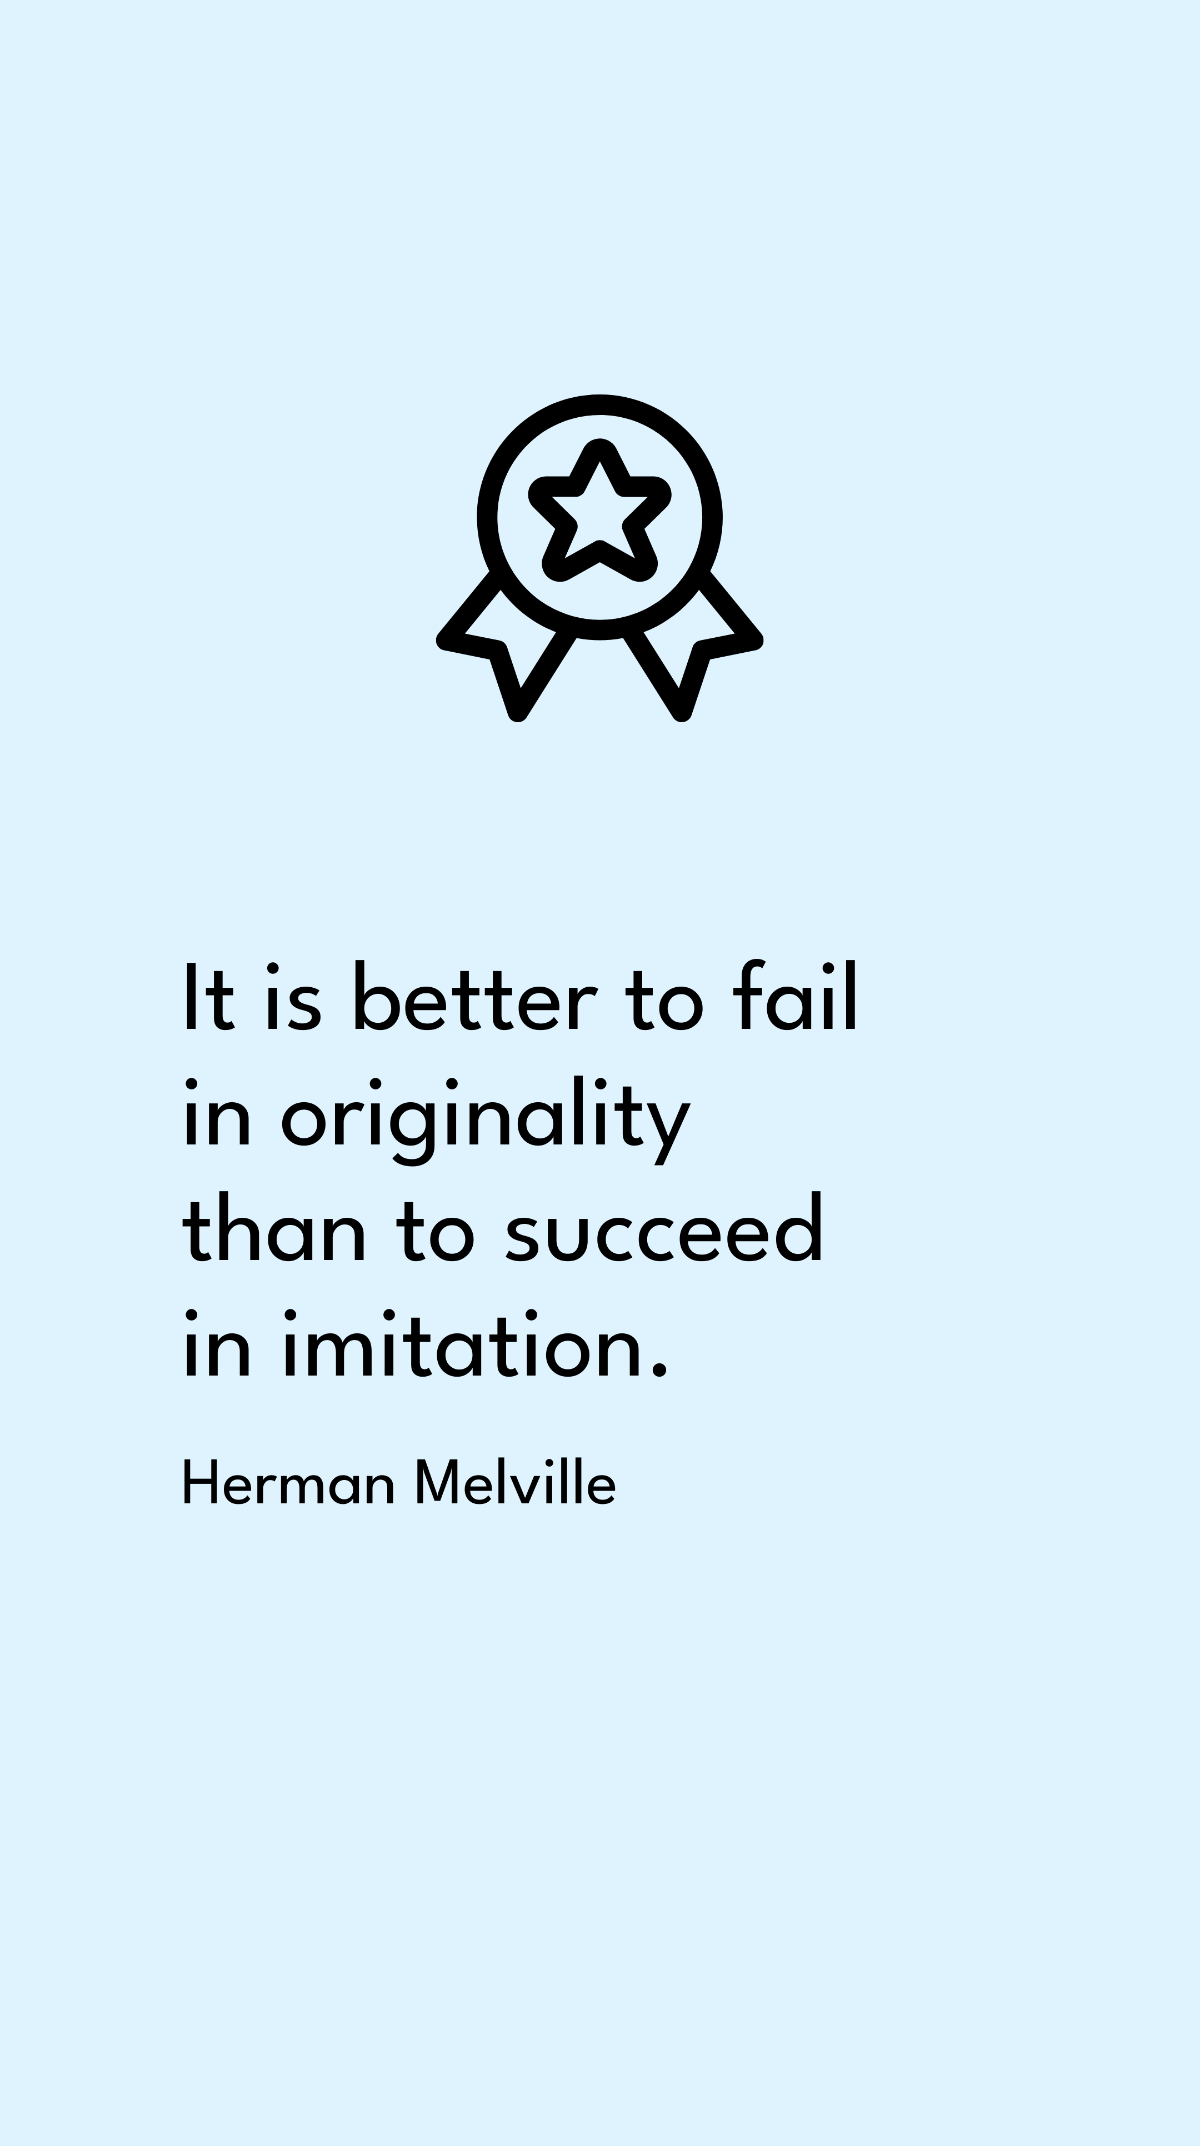 Herman Melville - It is better to fail in originality than to succeed in imitation. Template